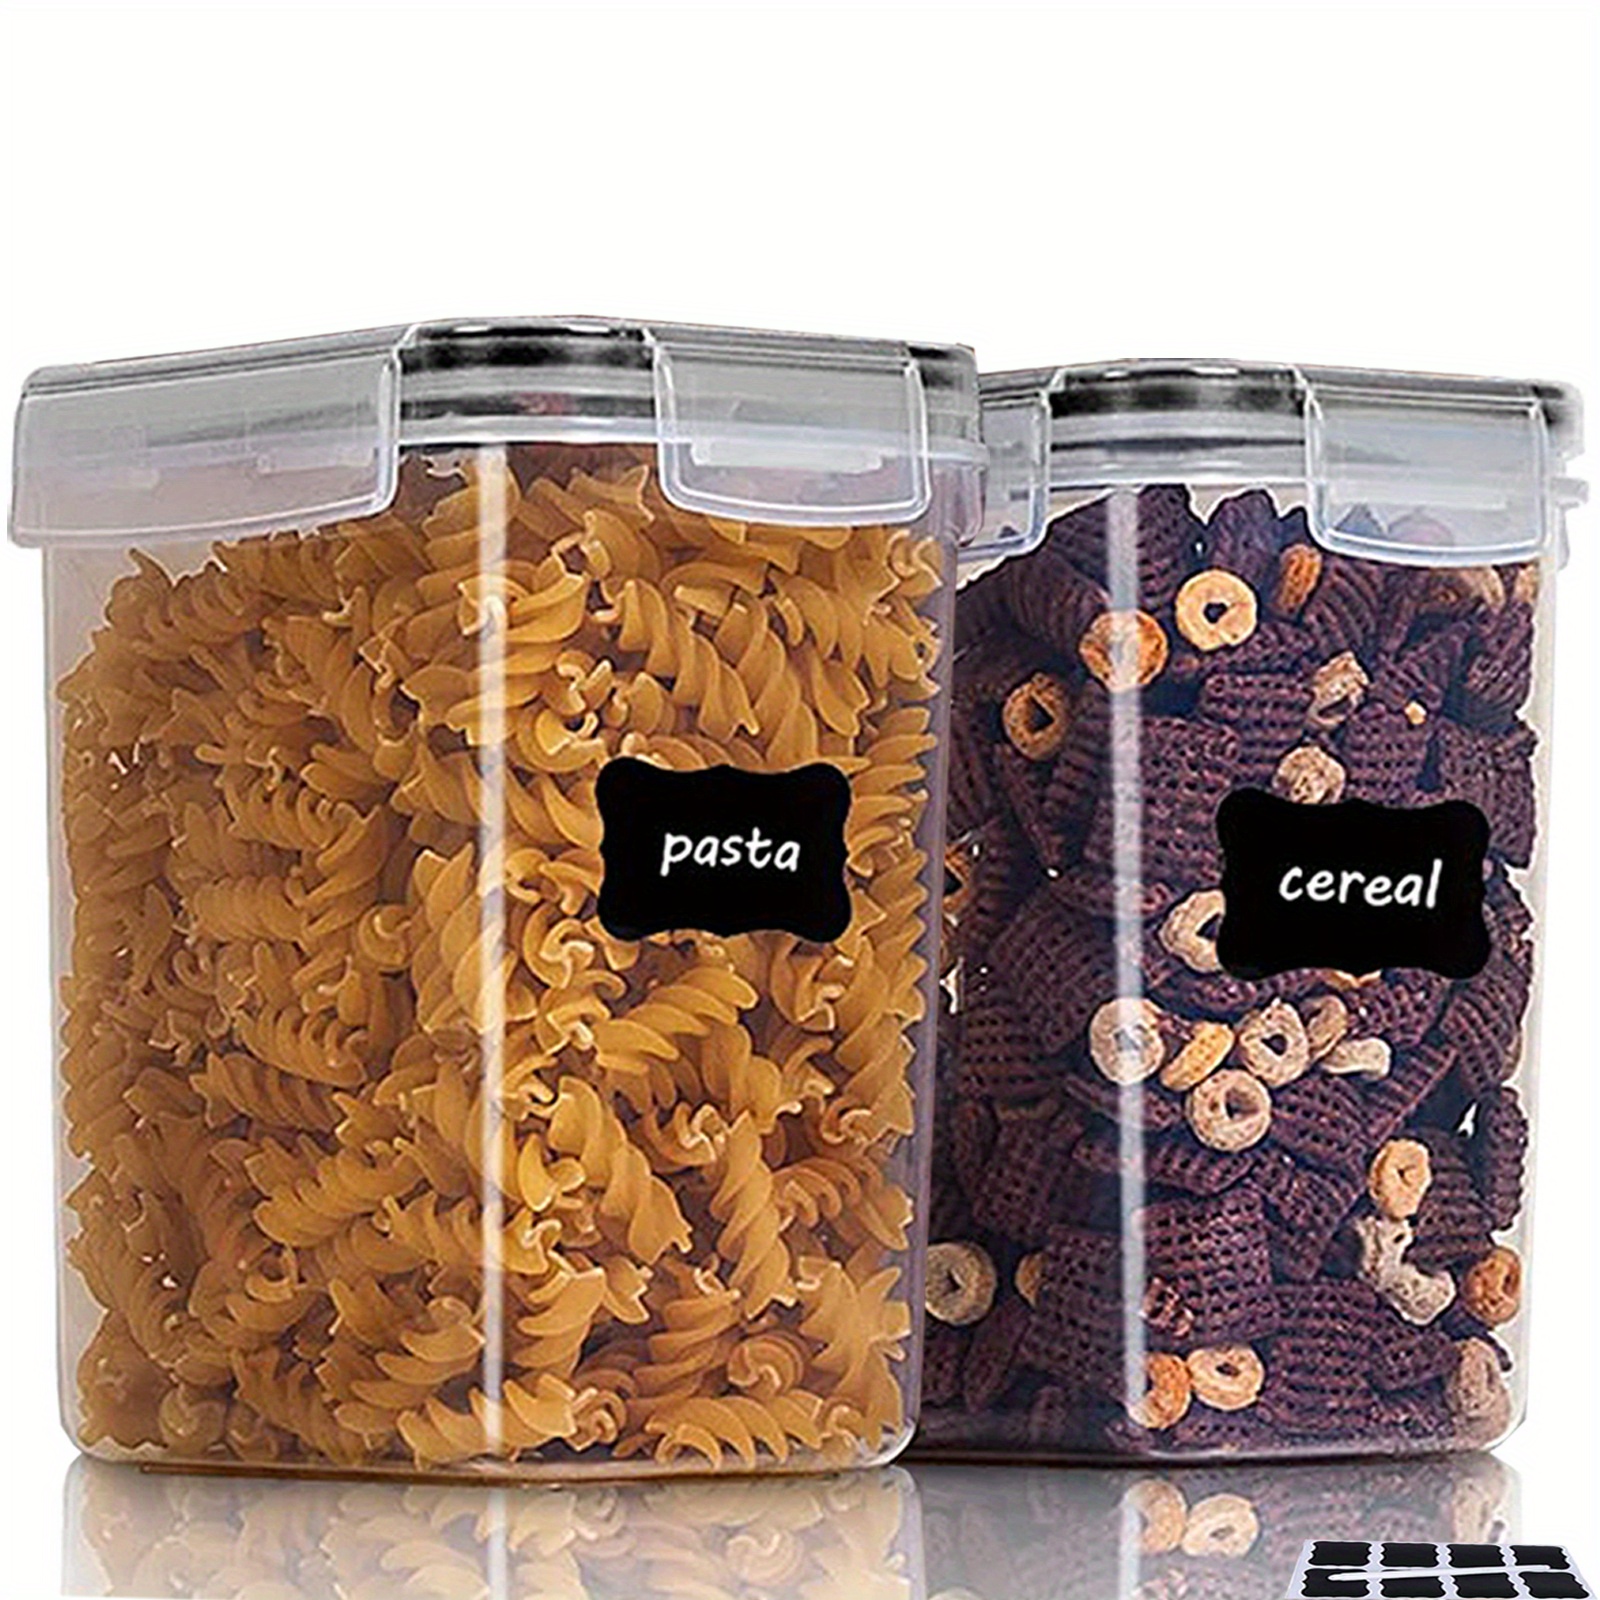  12 Pcs Airtight Food Storage Containers with Lids-Plastic  Pantry Storage Containers-100% Leakproof Reusable Organization and Storage,  BPA Free Clear Canisters for Cereal, Sugar, Rice, Pasta, and Flour: Home &  Kitchen